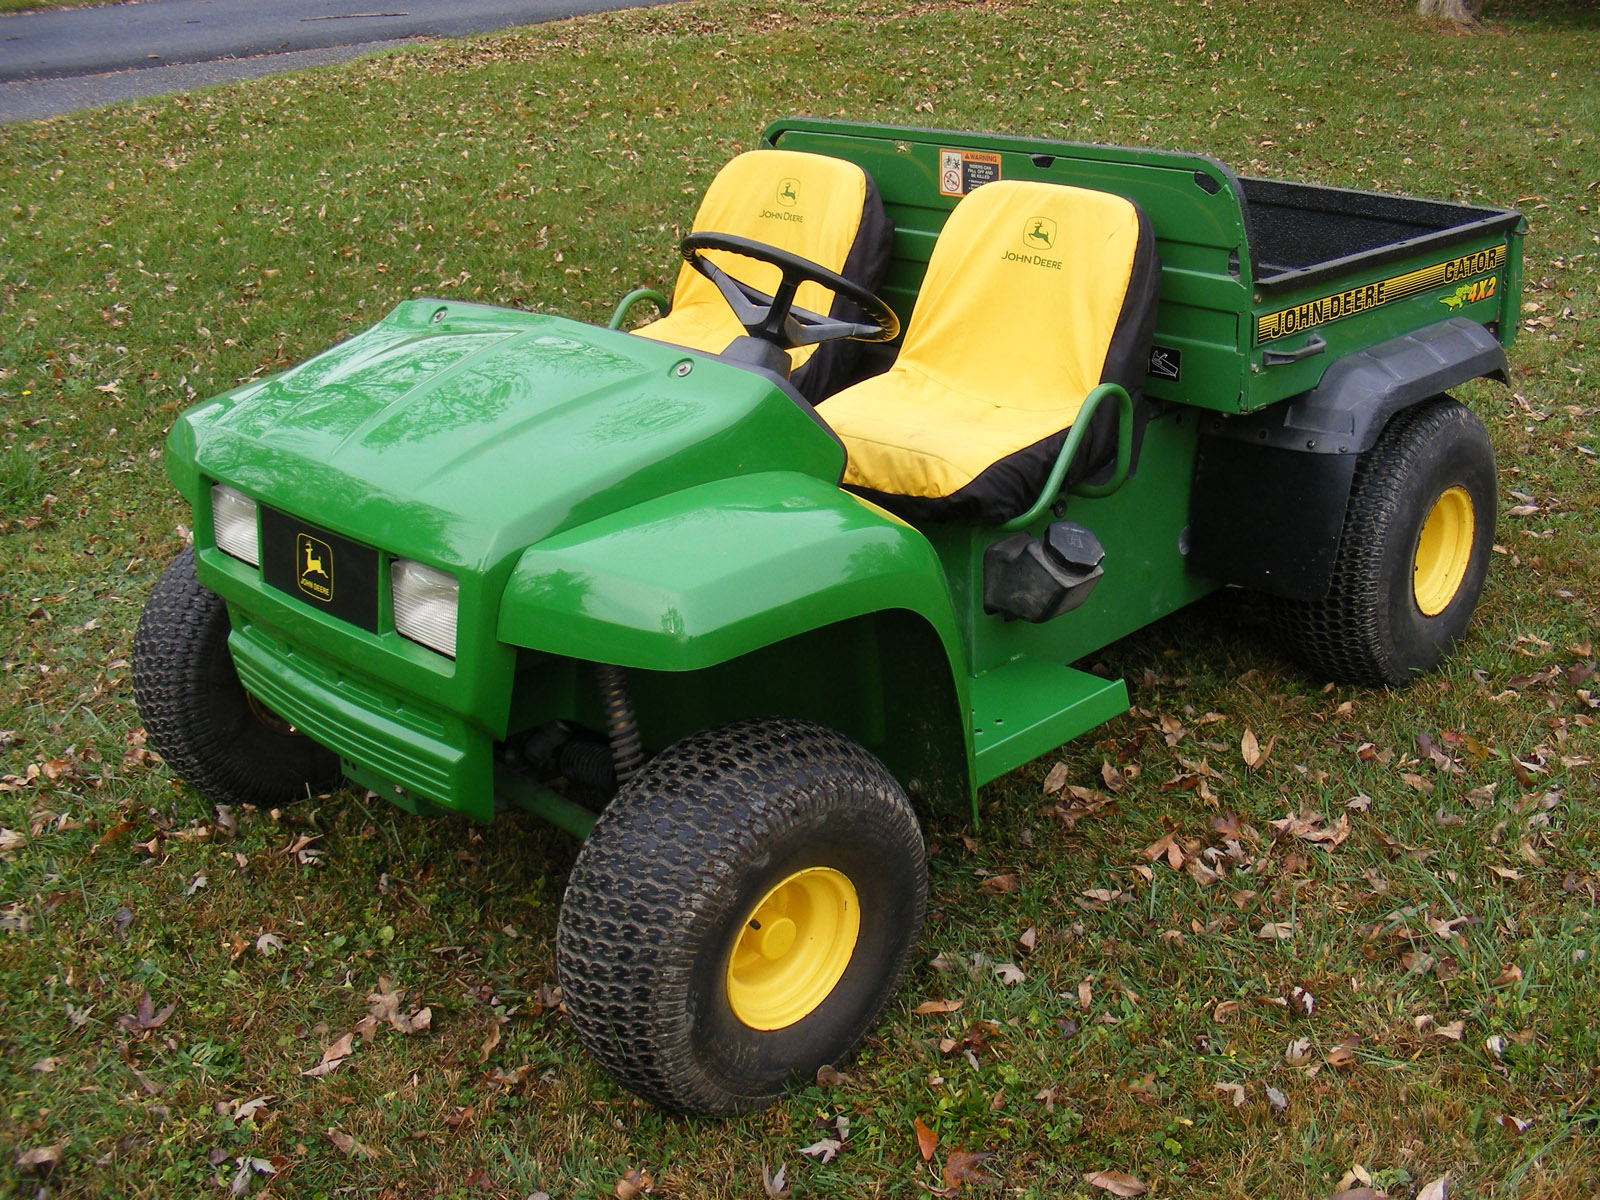 John Deere Gator Photo Pic High Quality New With Resolutions